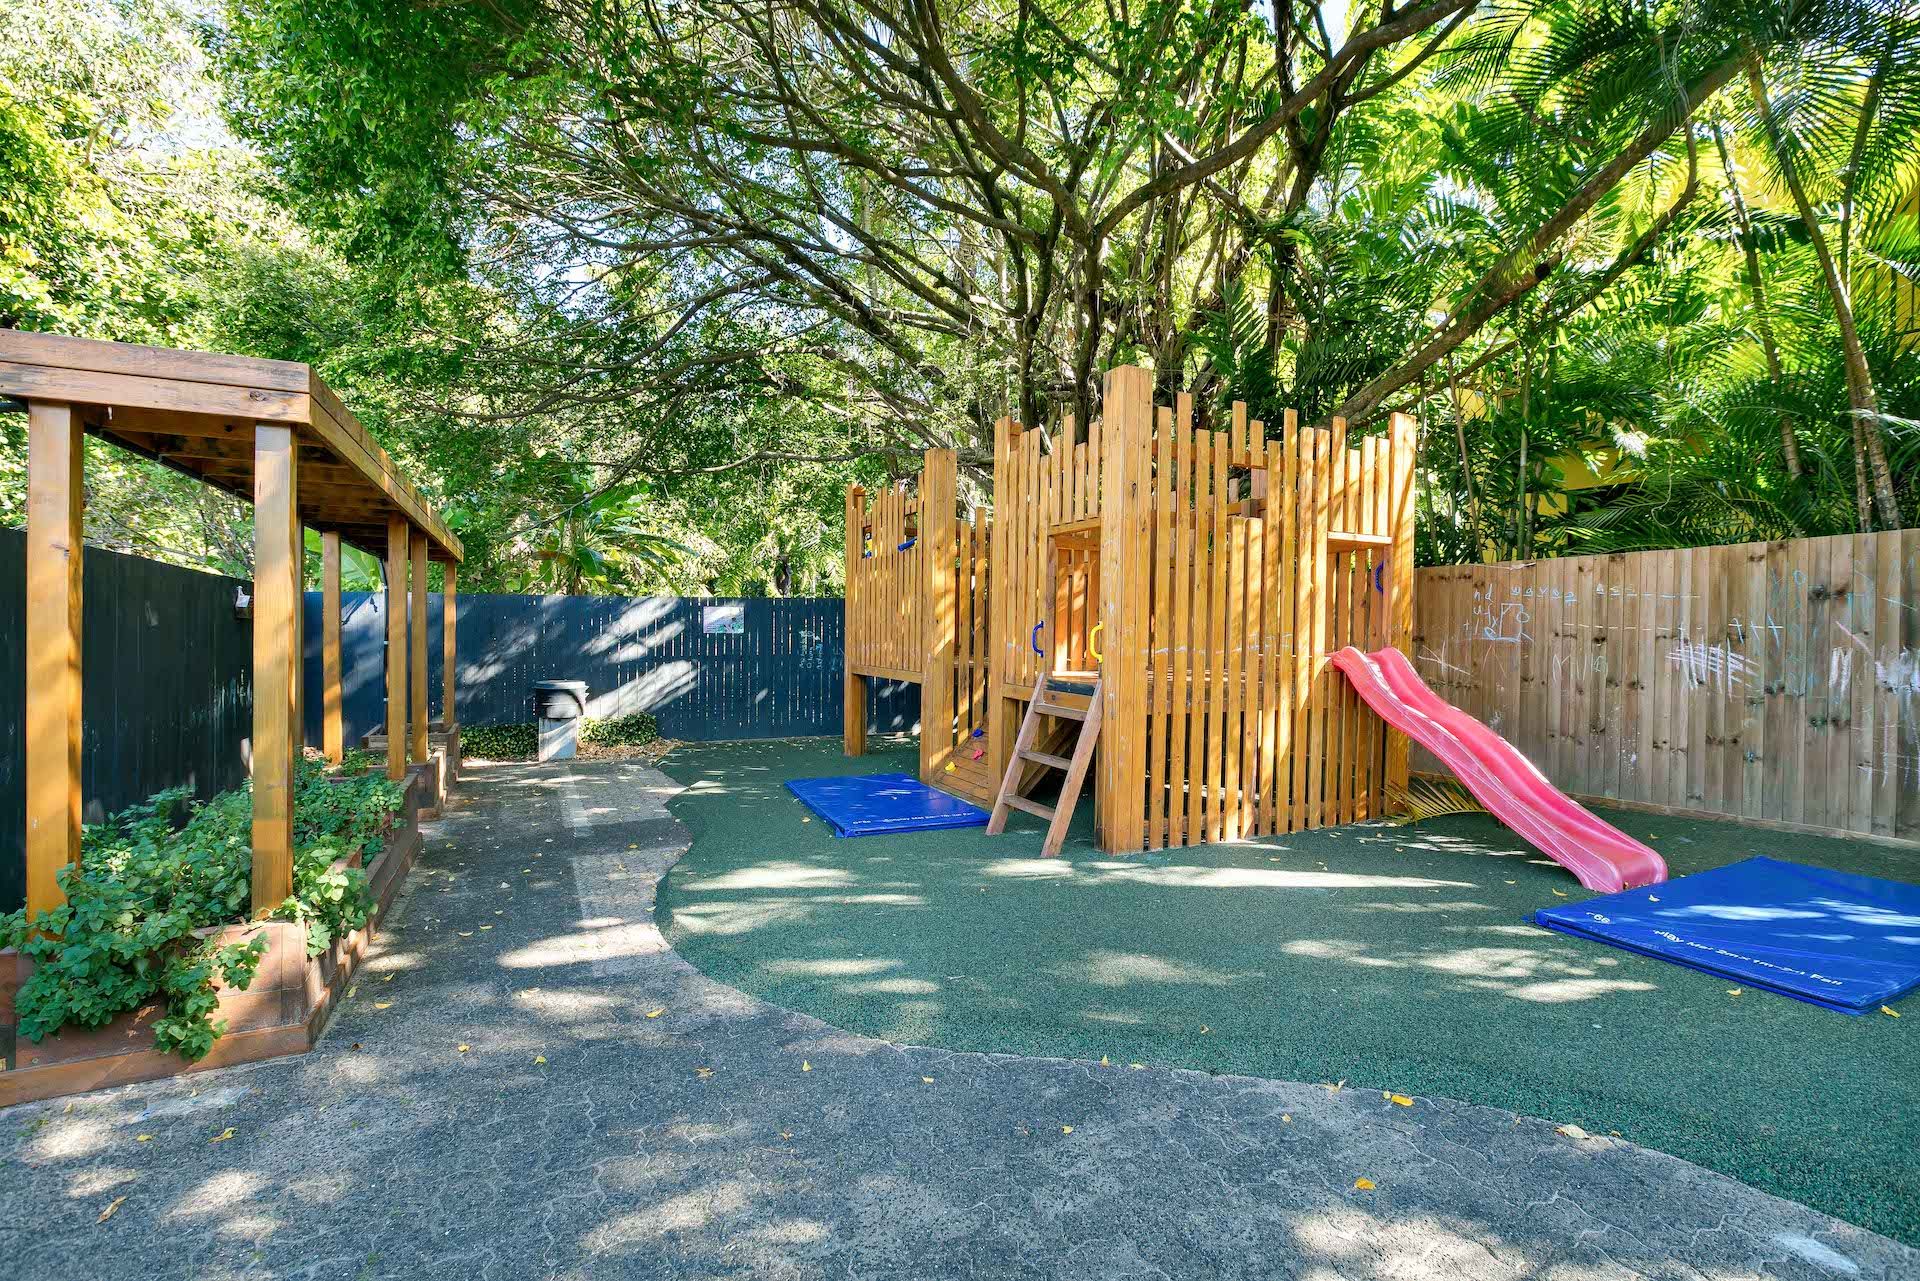 A shady, tree lined playground with a wooden fort